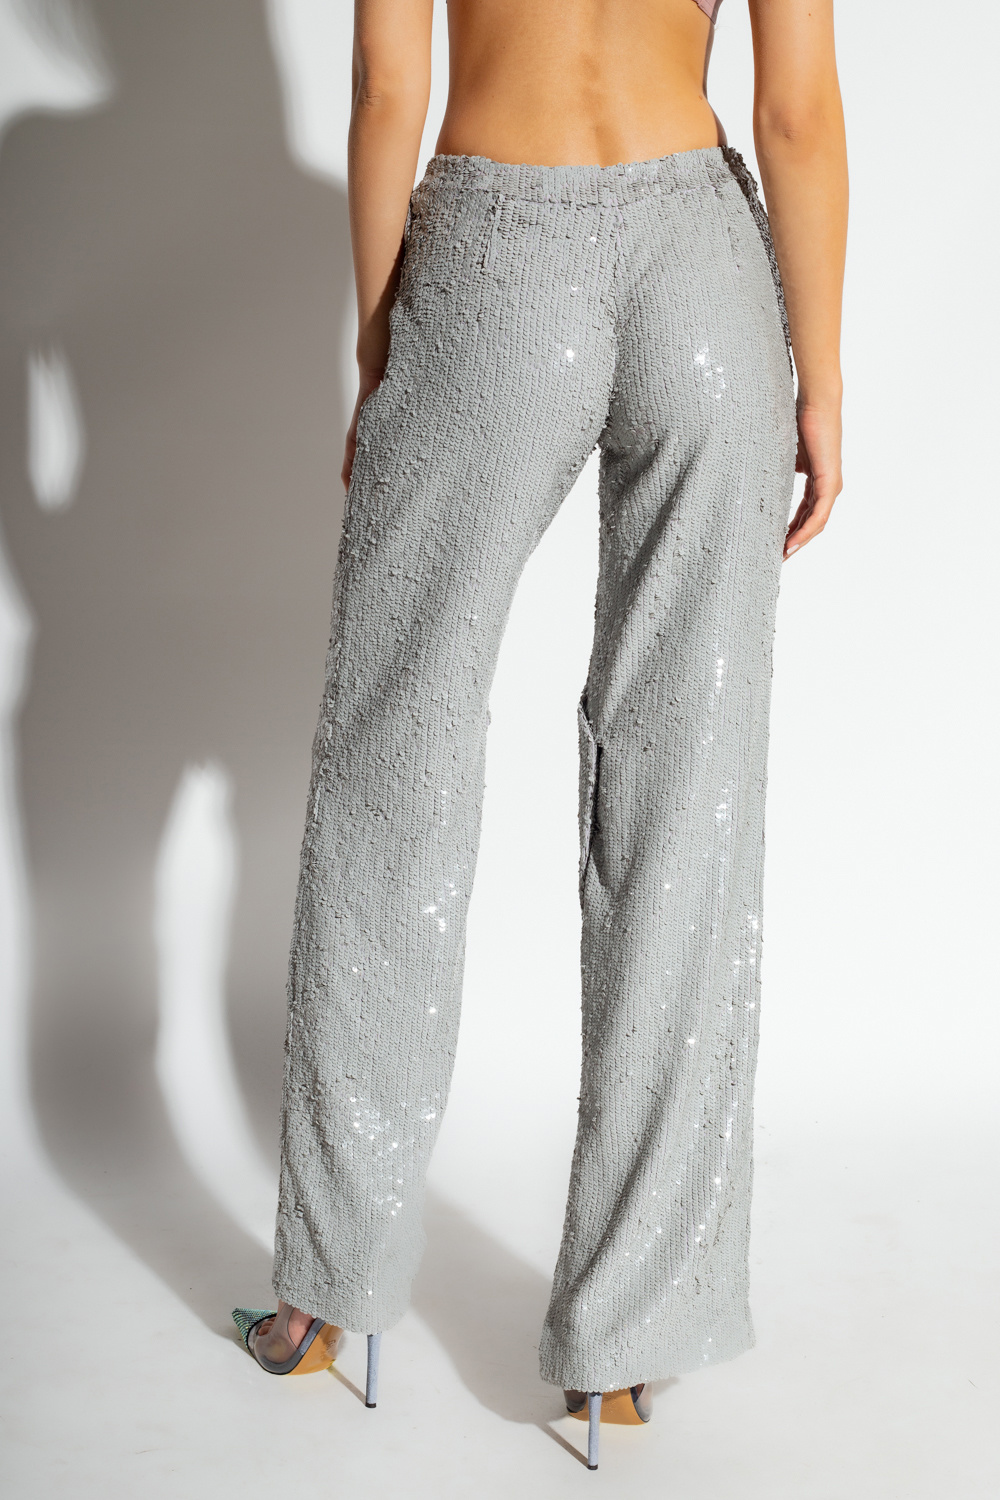 The Mannei ‘Eljas’ sequinned trousers